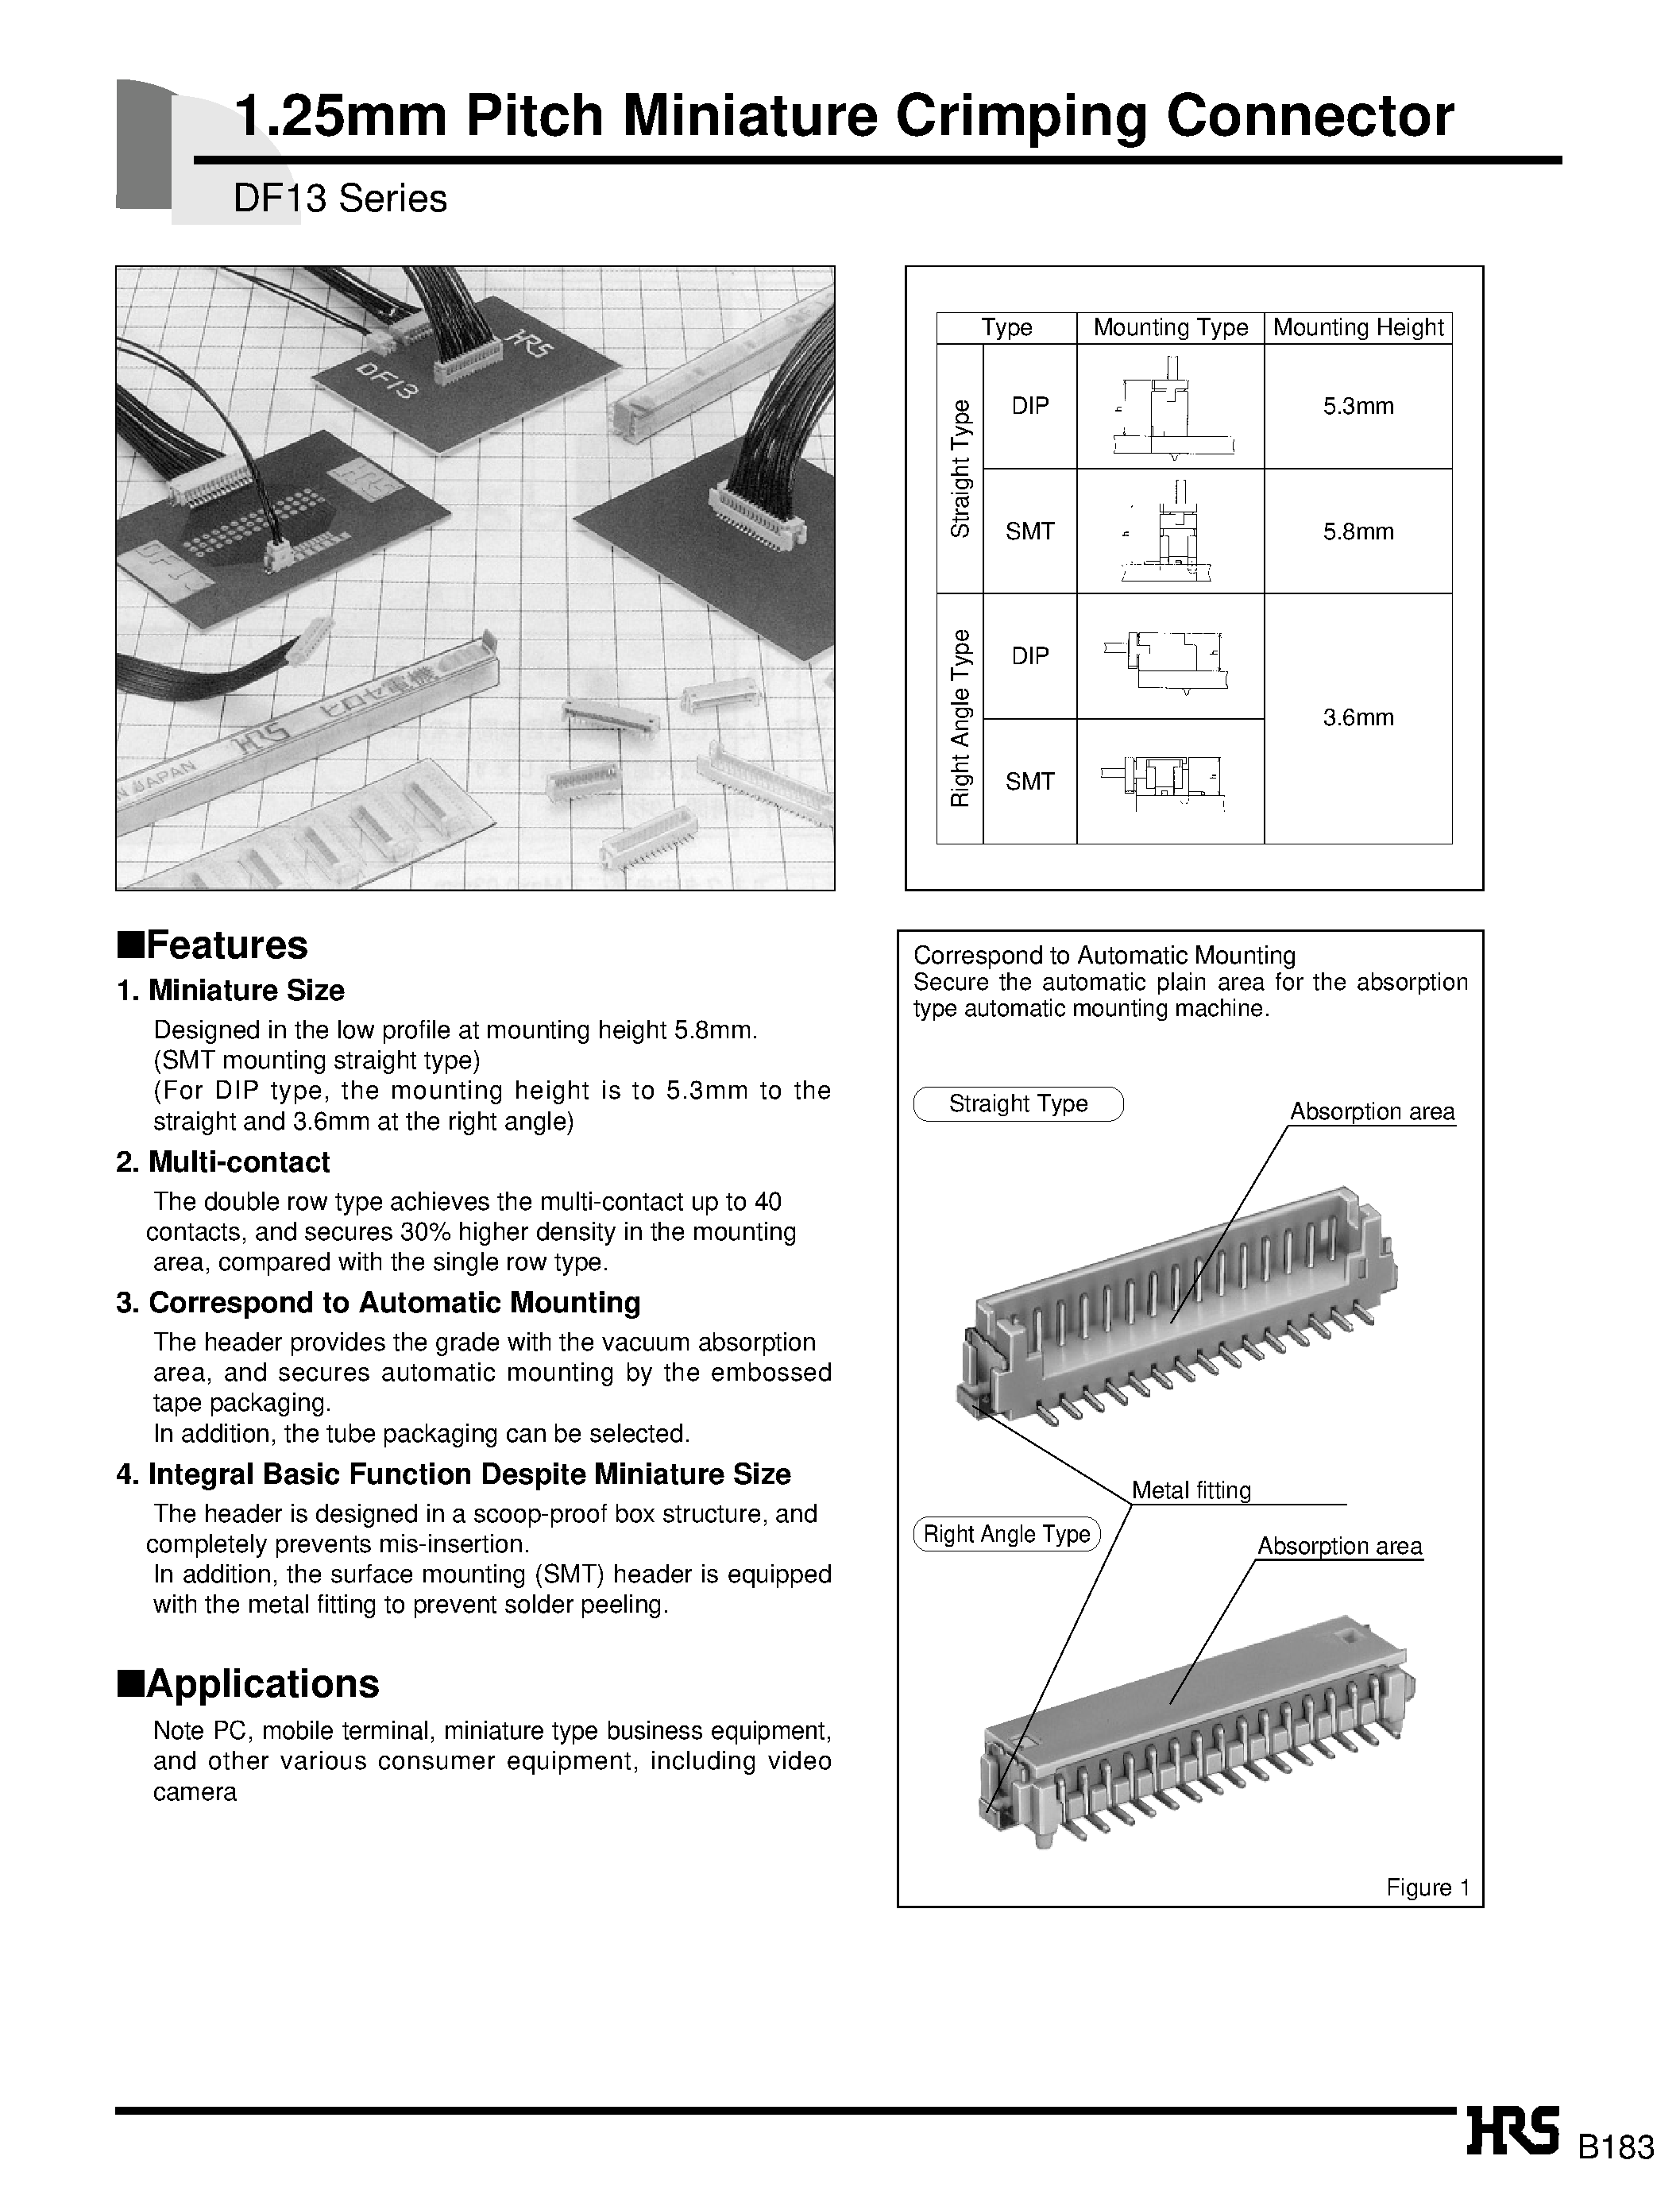 Datasheet DF13-10DS-1.25C - 1.25mm Pitch Miniature Crimping Connector page 1